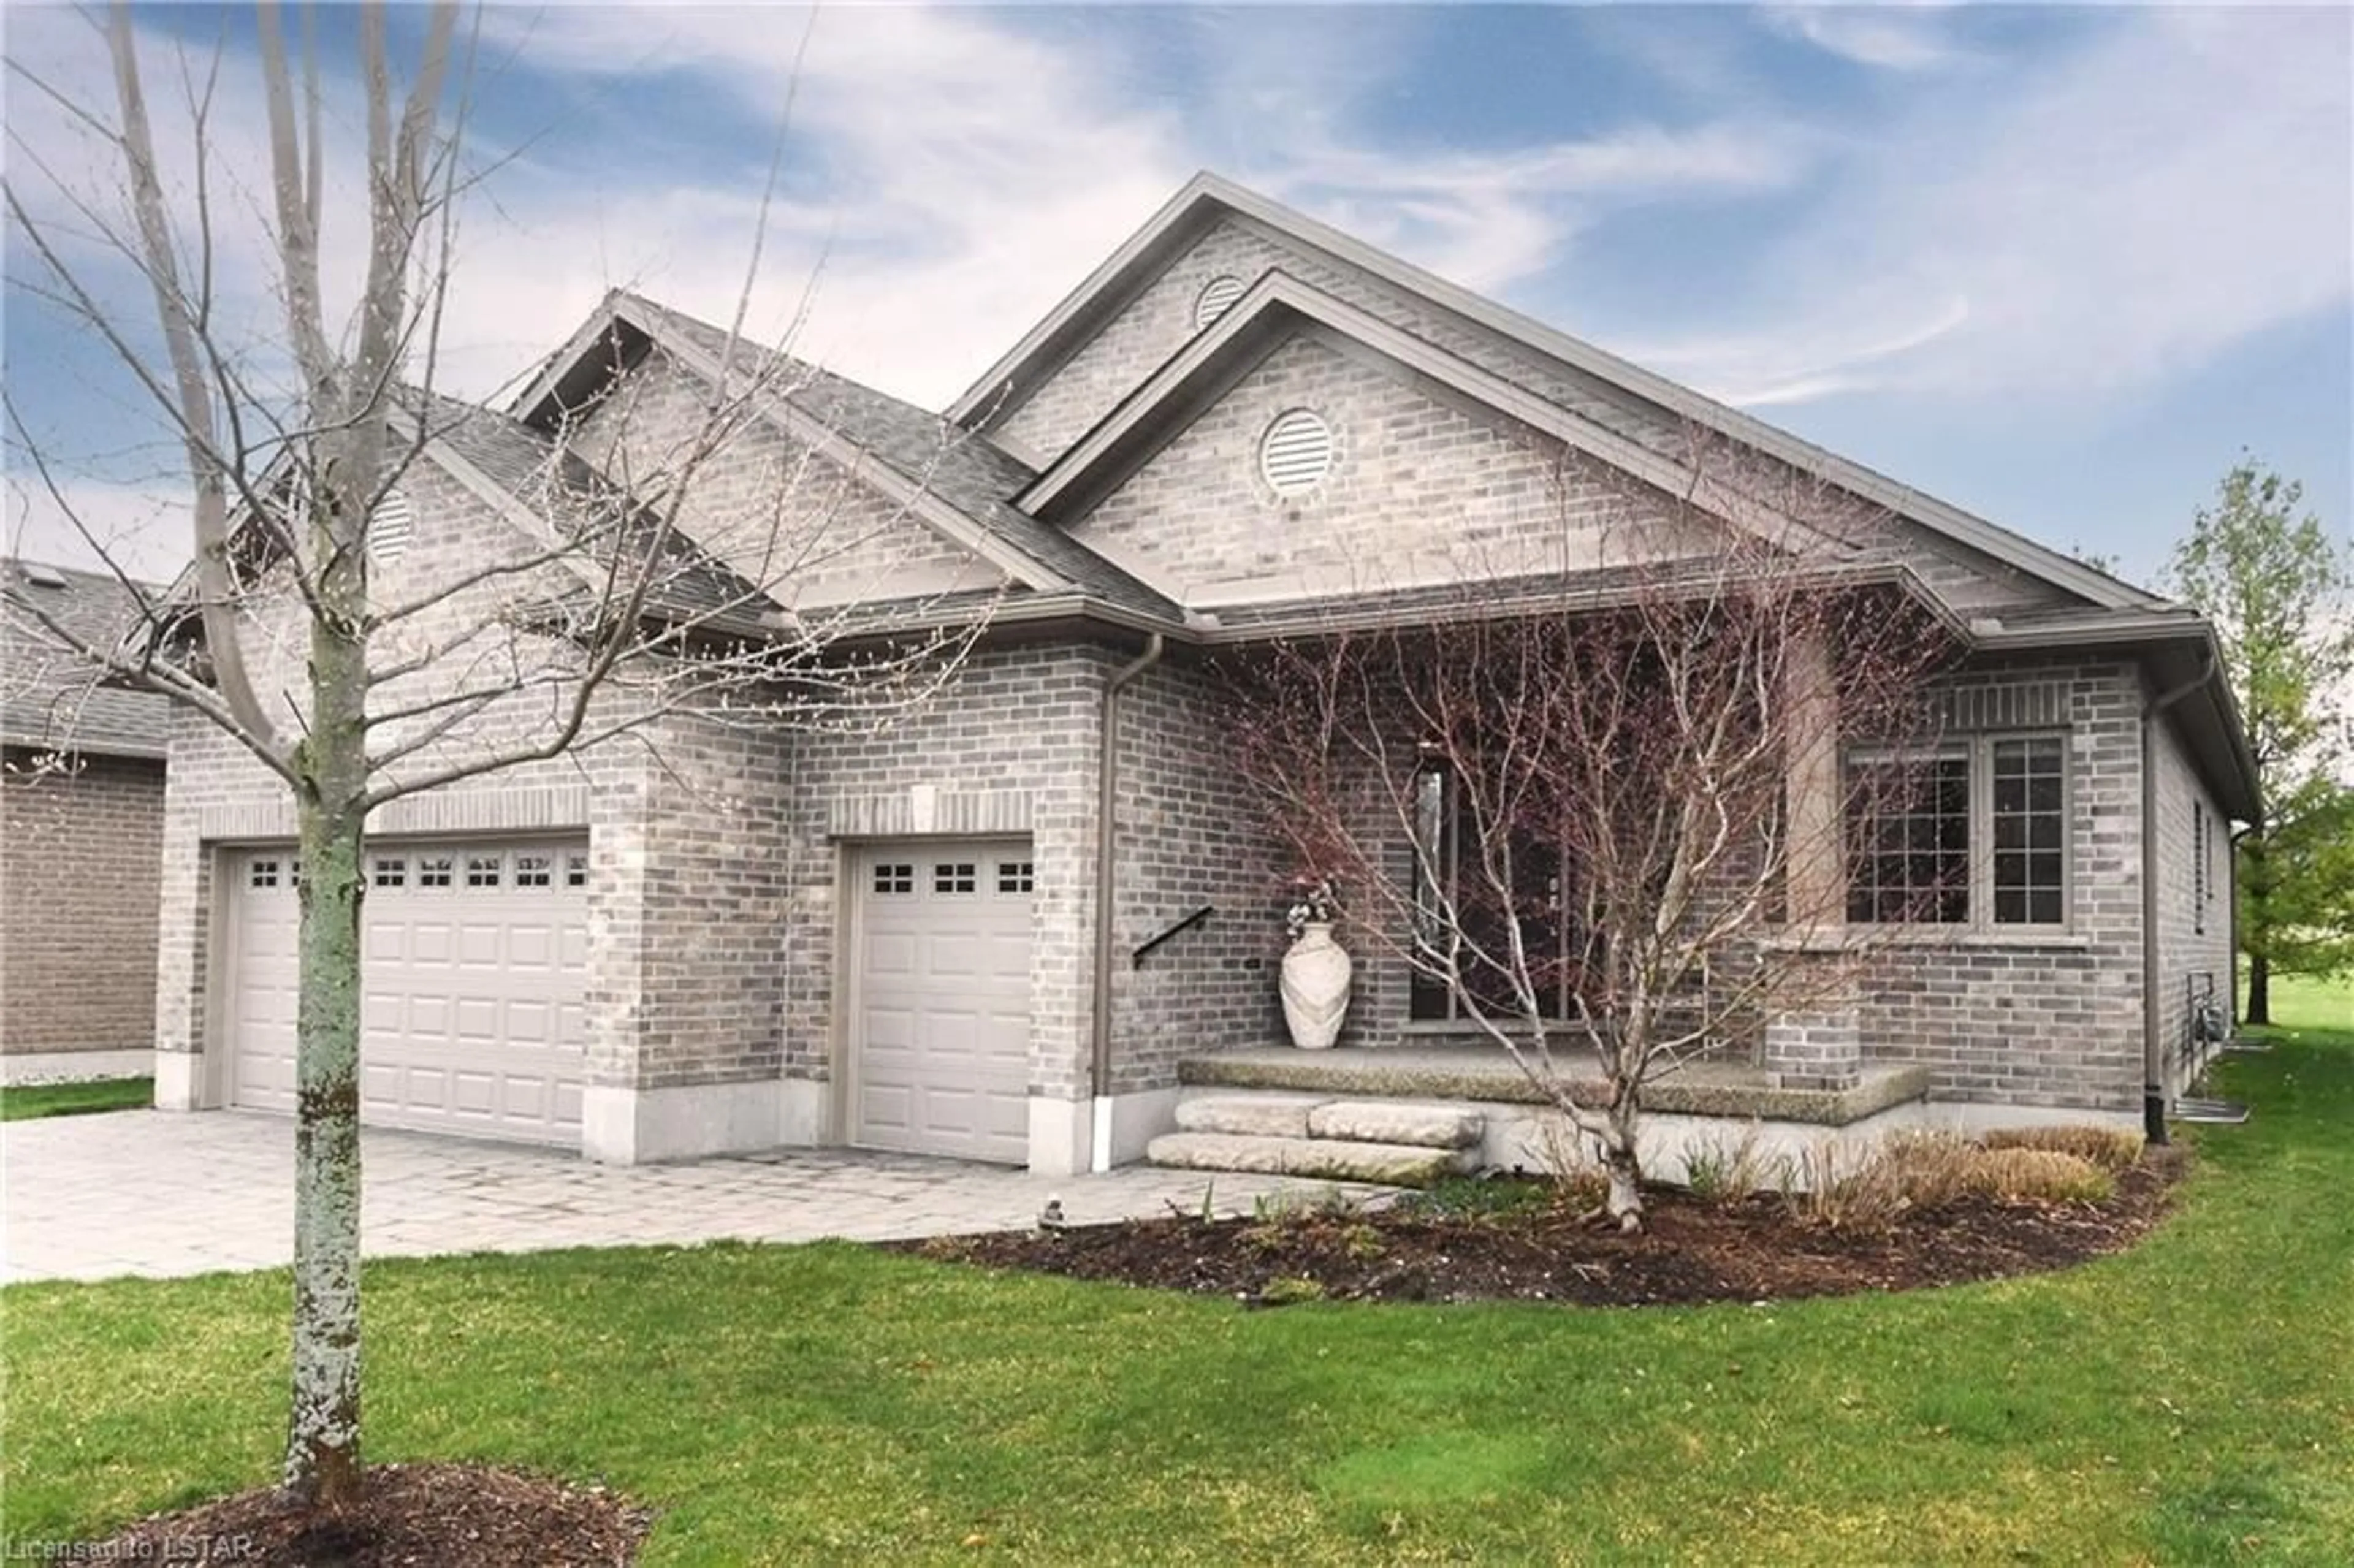 Home with brick exterior material for 2622 Sandra Post Cres, London Ontario N6K 5R4